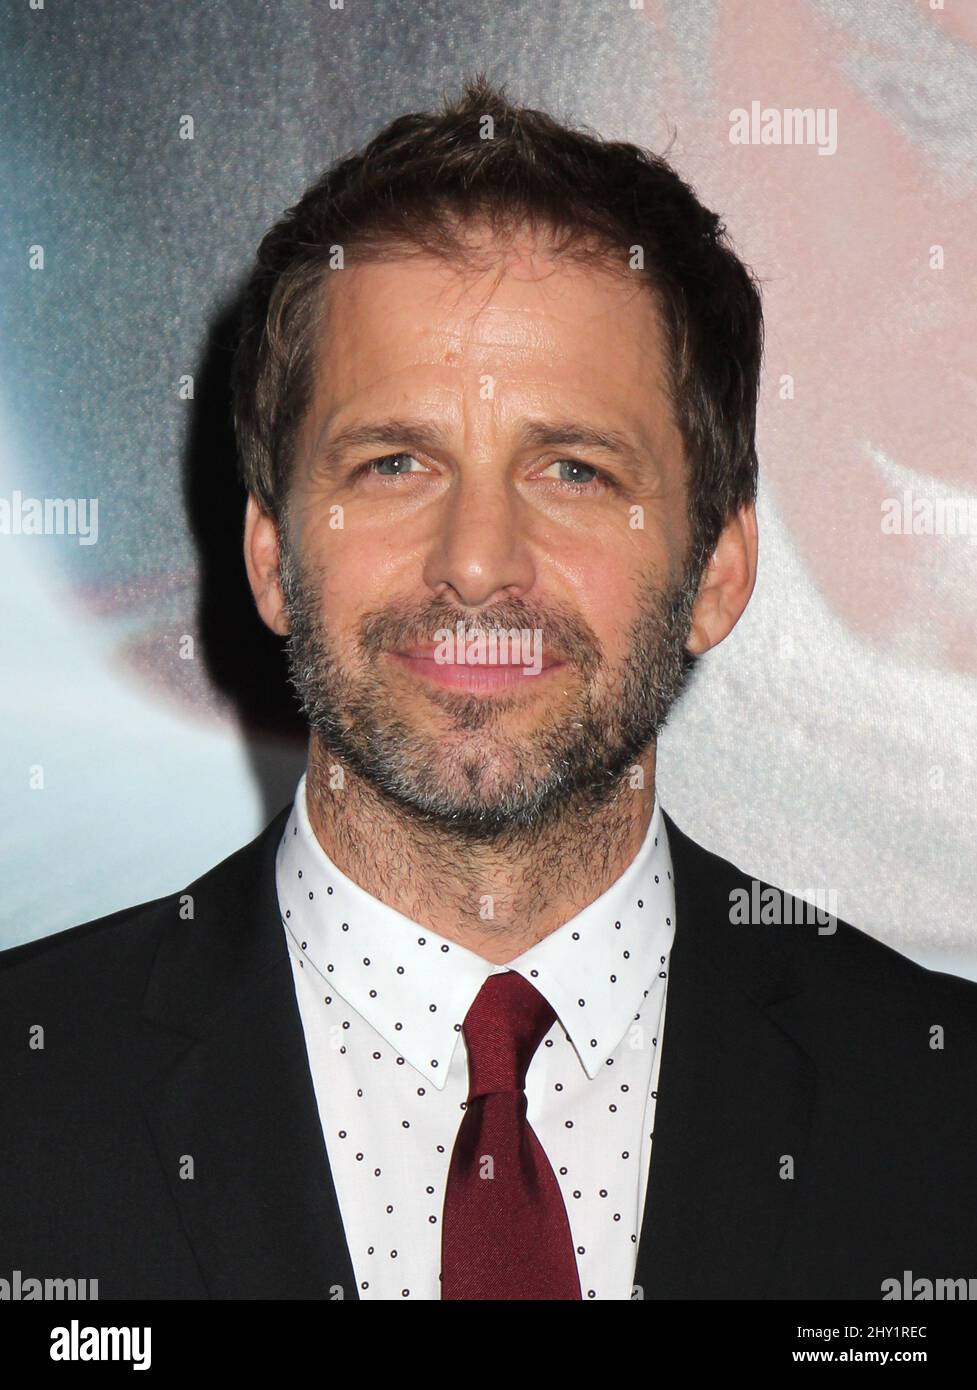 Zack Snyder attending the 'Man Of Steel' premiere held at Alice Tully Hall at Lincoln Center in New York, USA. Stock Photo